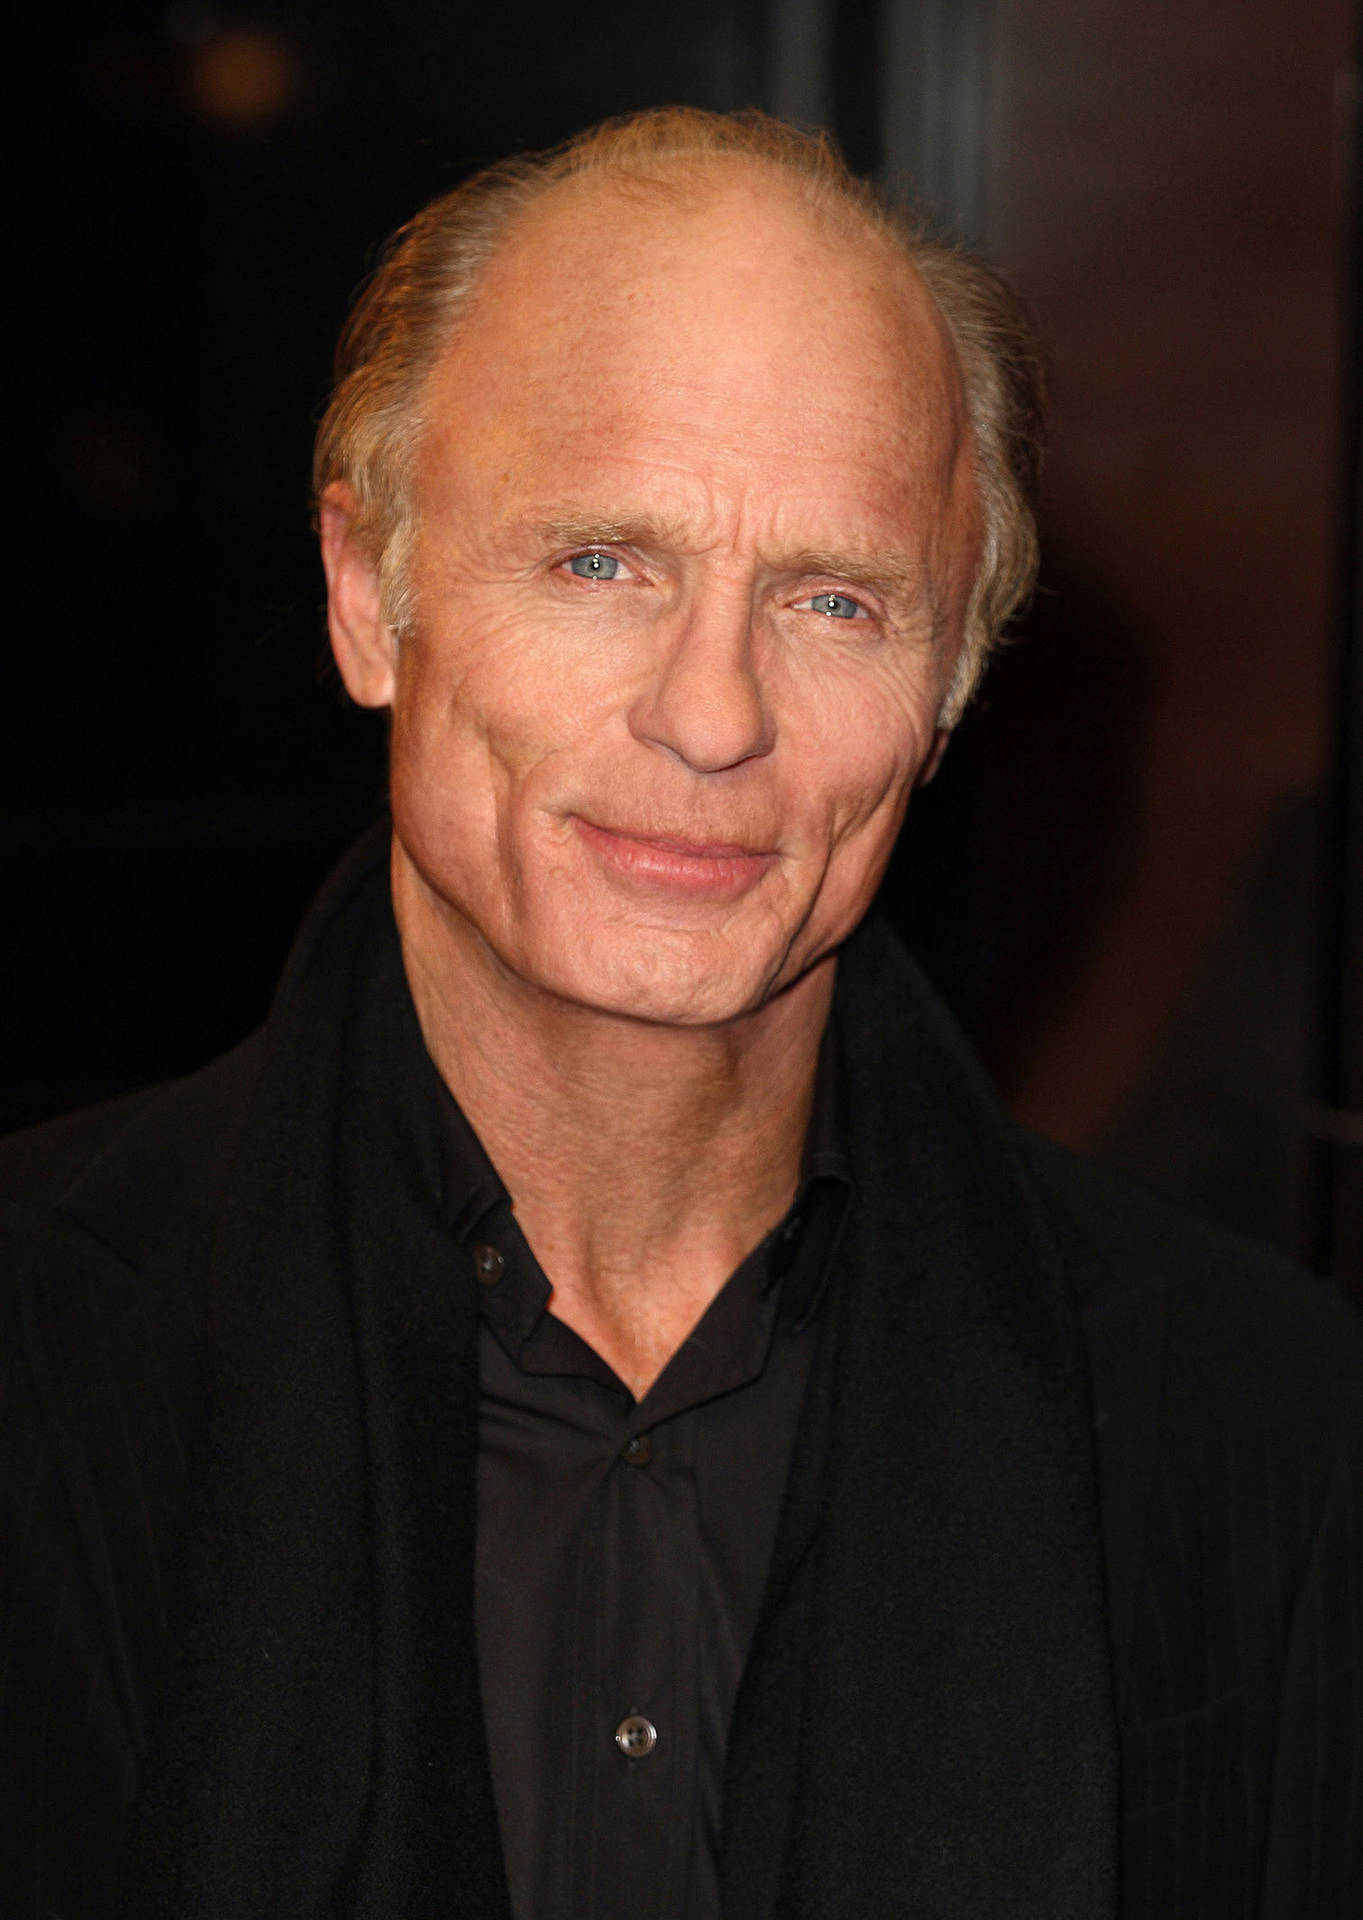 Ed Harris at "The Way Back" Movie Premiere Wallpaper